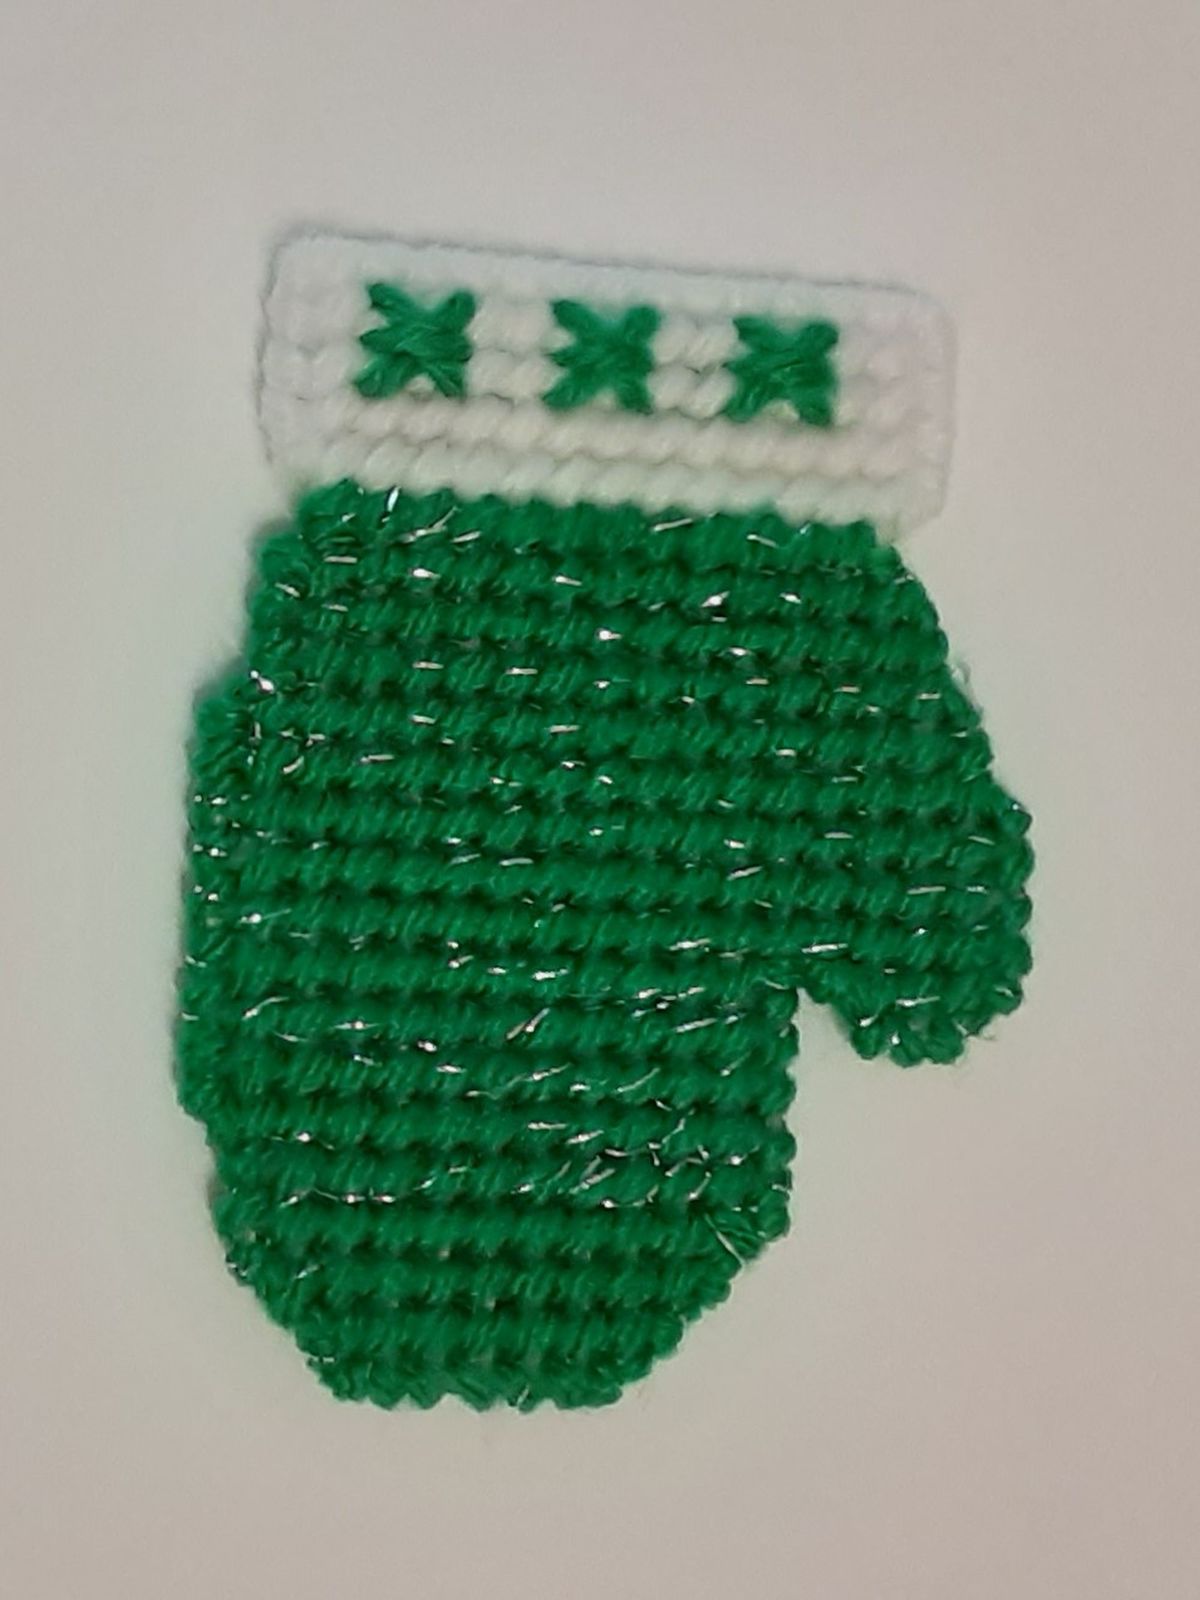 Primary image for Mitten Magnet, Gift for Her, Christmas Decor, Needlepoint, Green